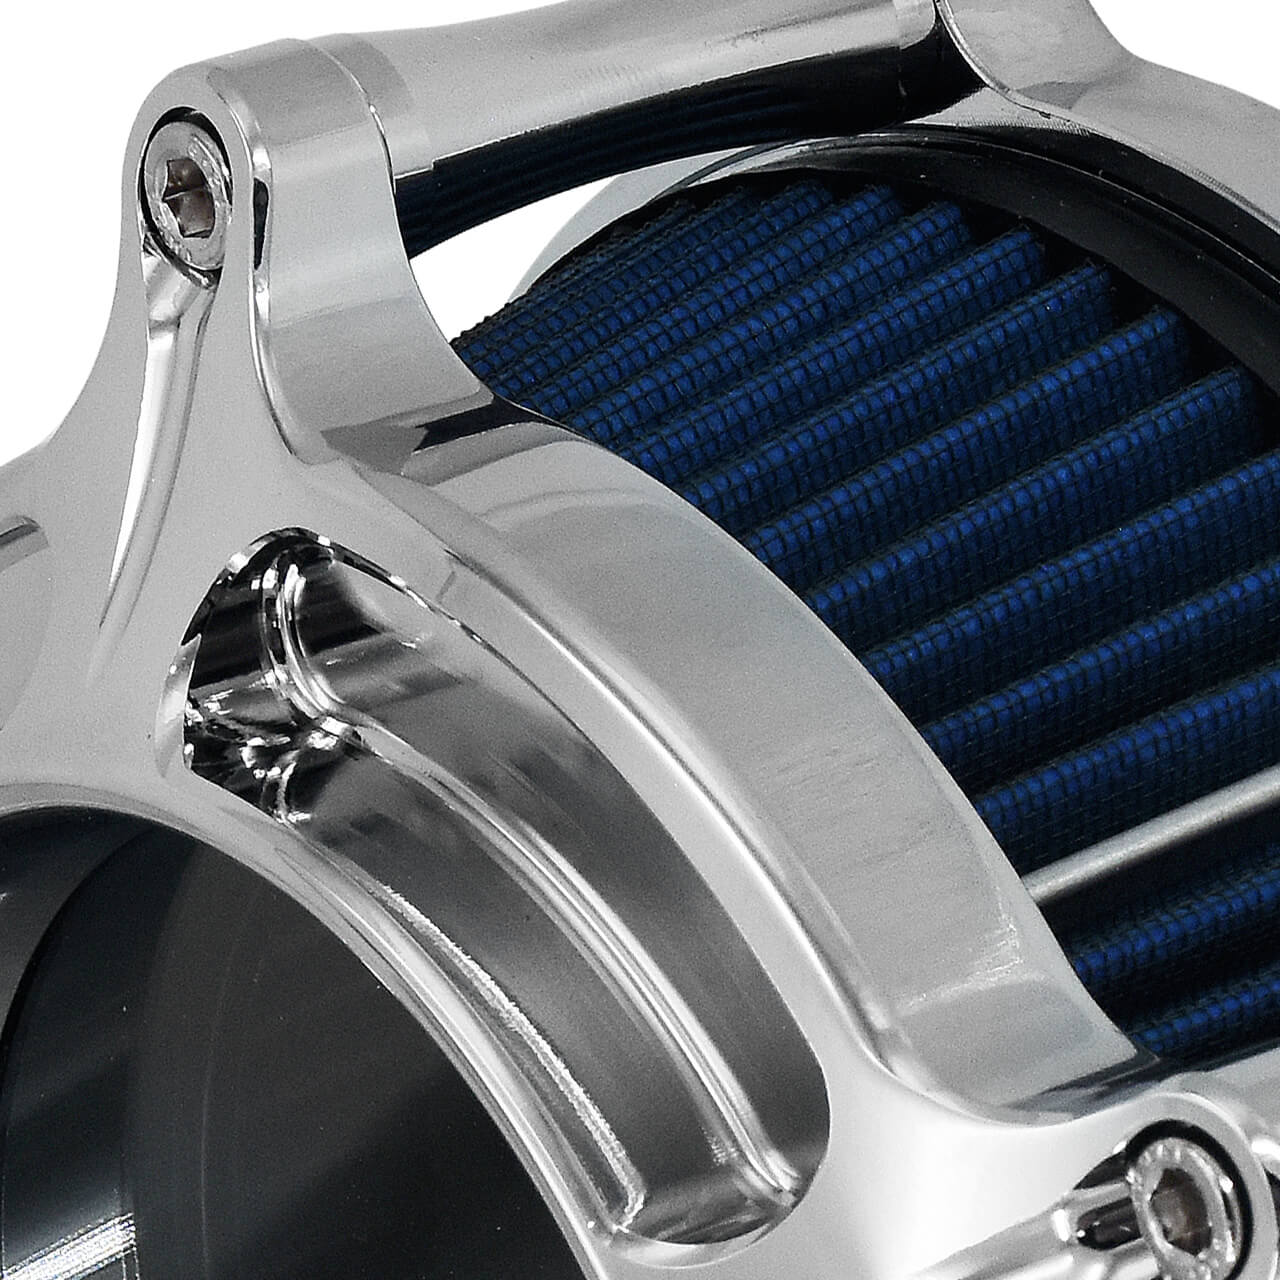 AF007004-mactions-air-cleaner-blue-intake-for-harley-m8-touring